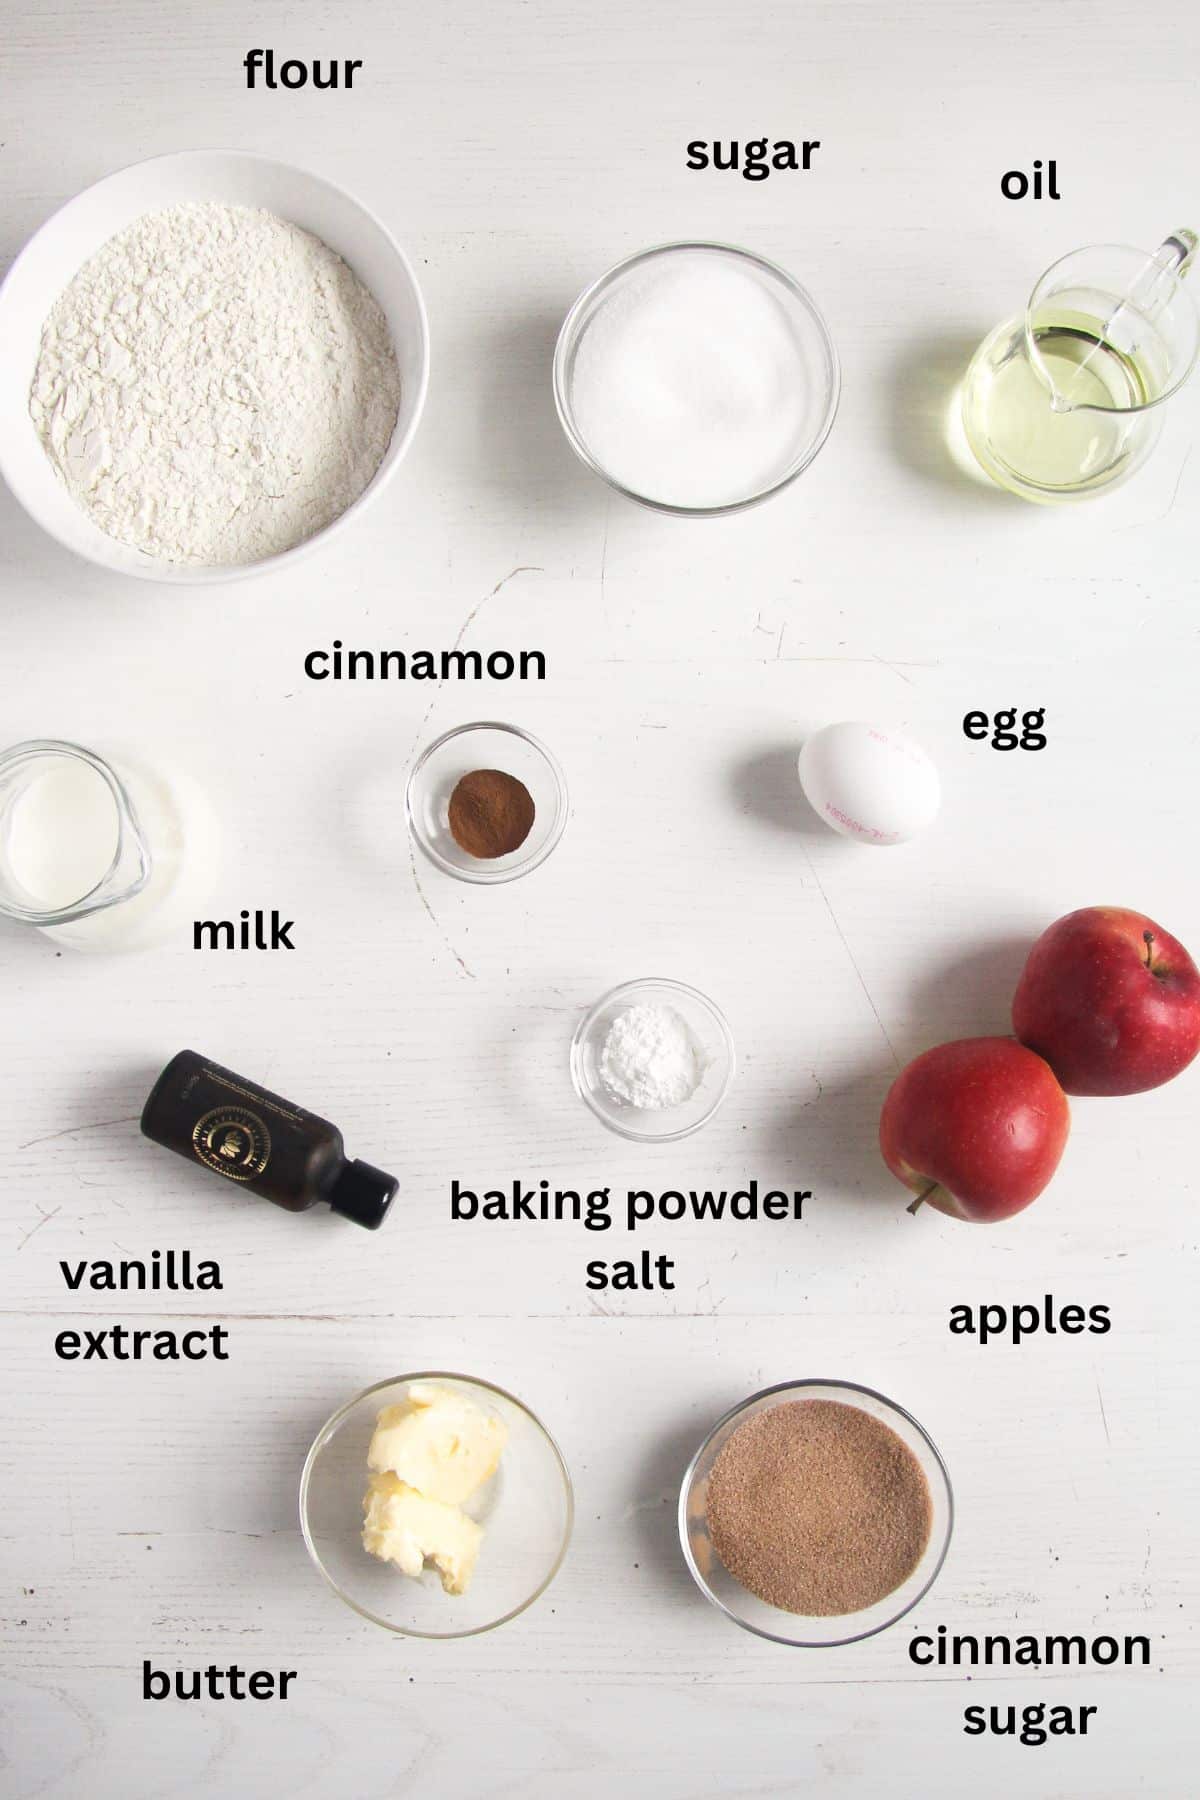 listed ingredients for making donut muffins with cinnamon and apples.